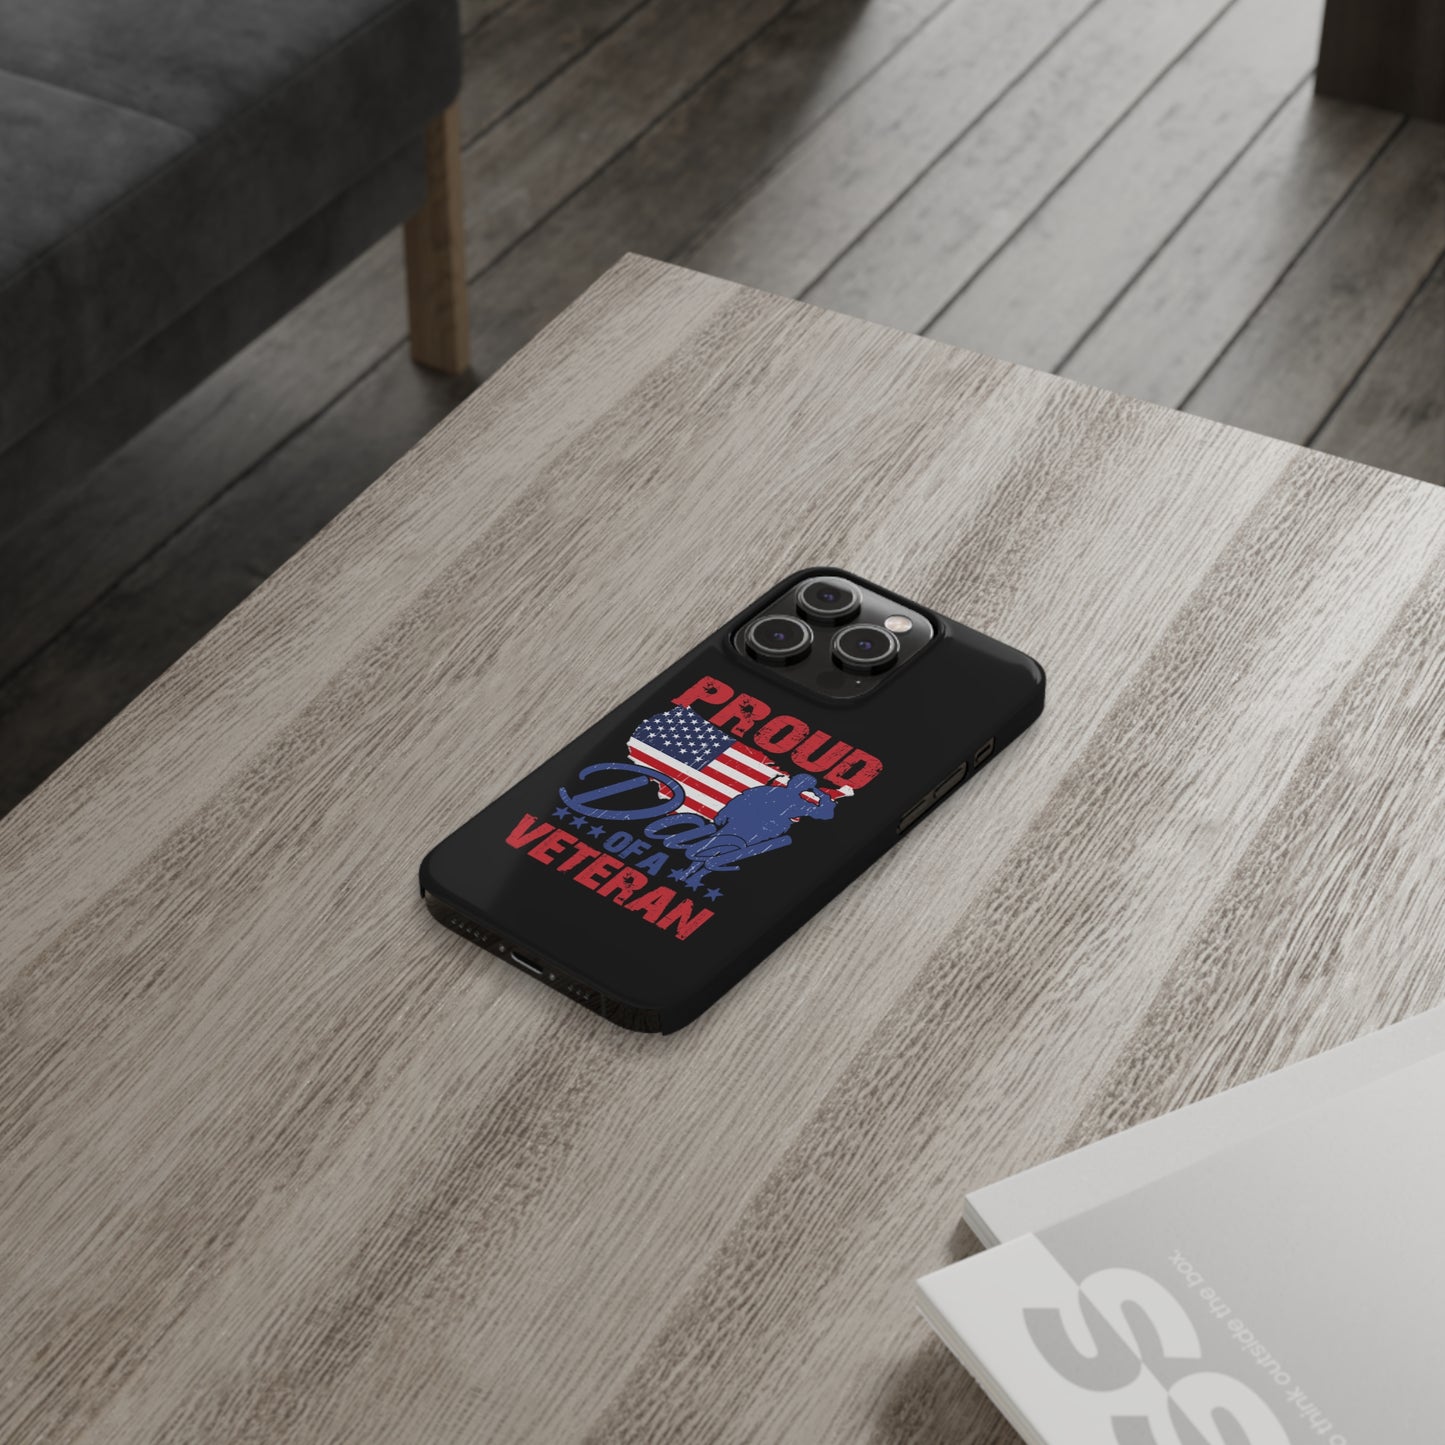 "Proud Dad Of A Veteran" Iphone Case - Weave Got Gifts - Unique Gifts You Won’t Find Anywhere Else!